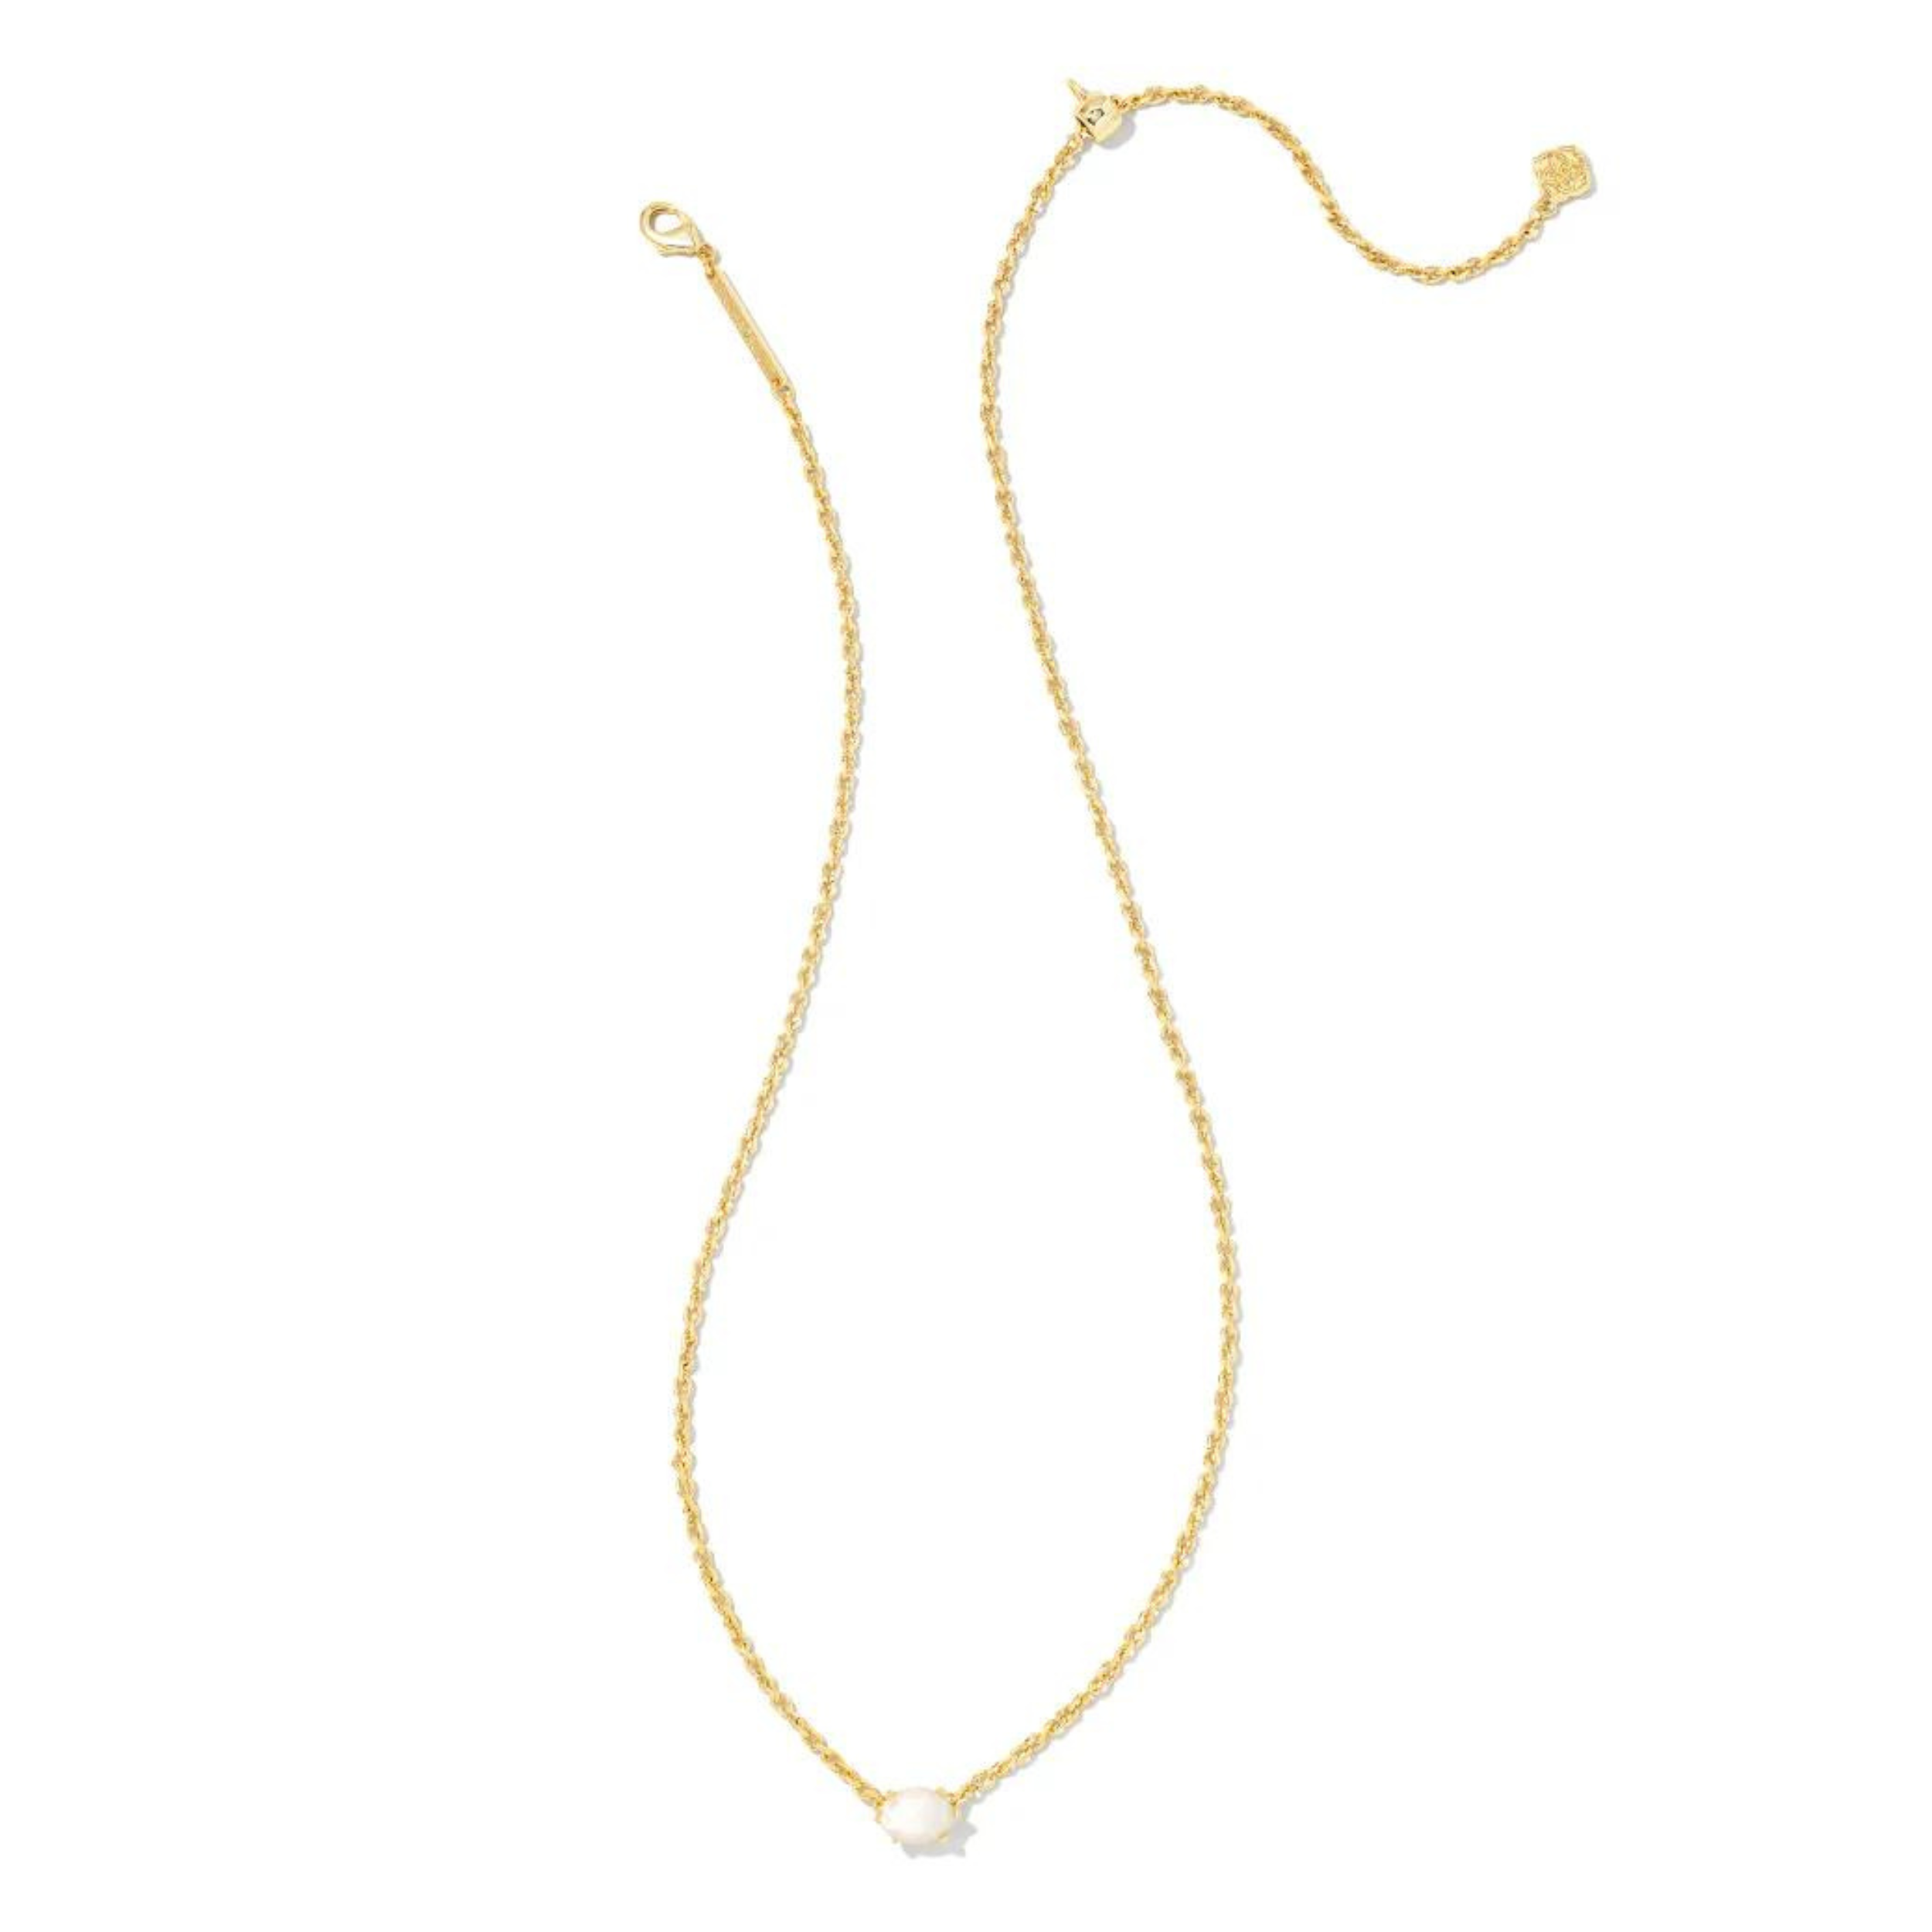 Kendra Scott | Cailin Gold Pendant Necklace in Ivory Mother-of-Pearl